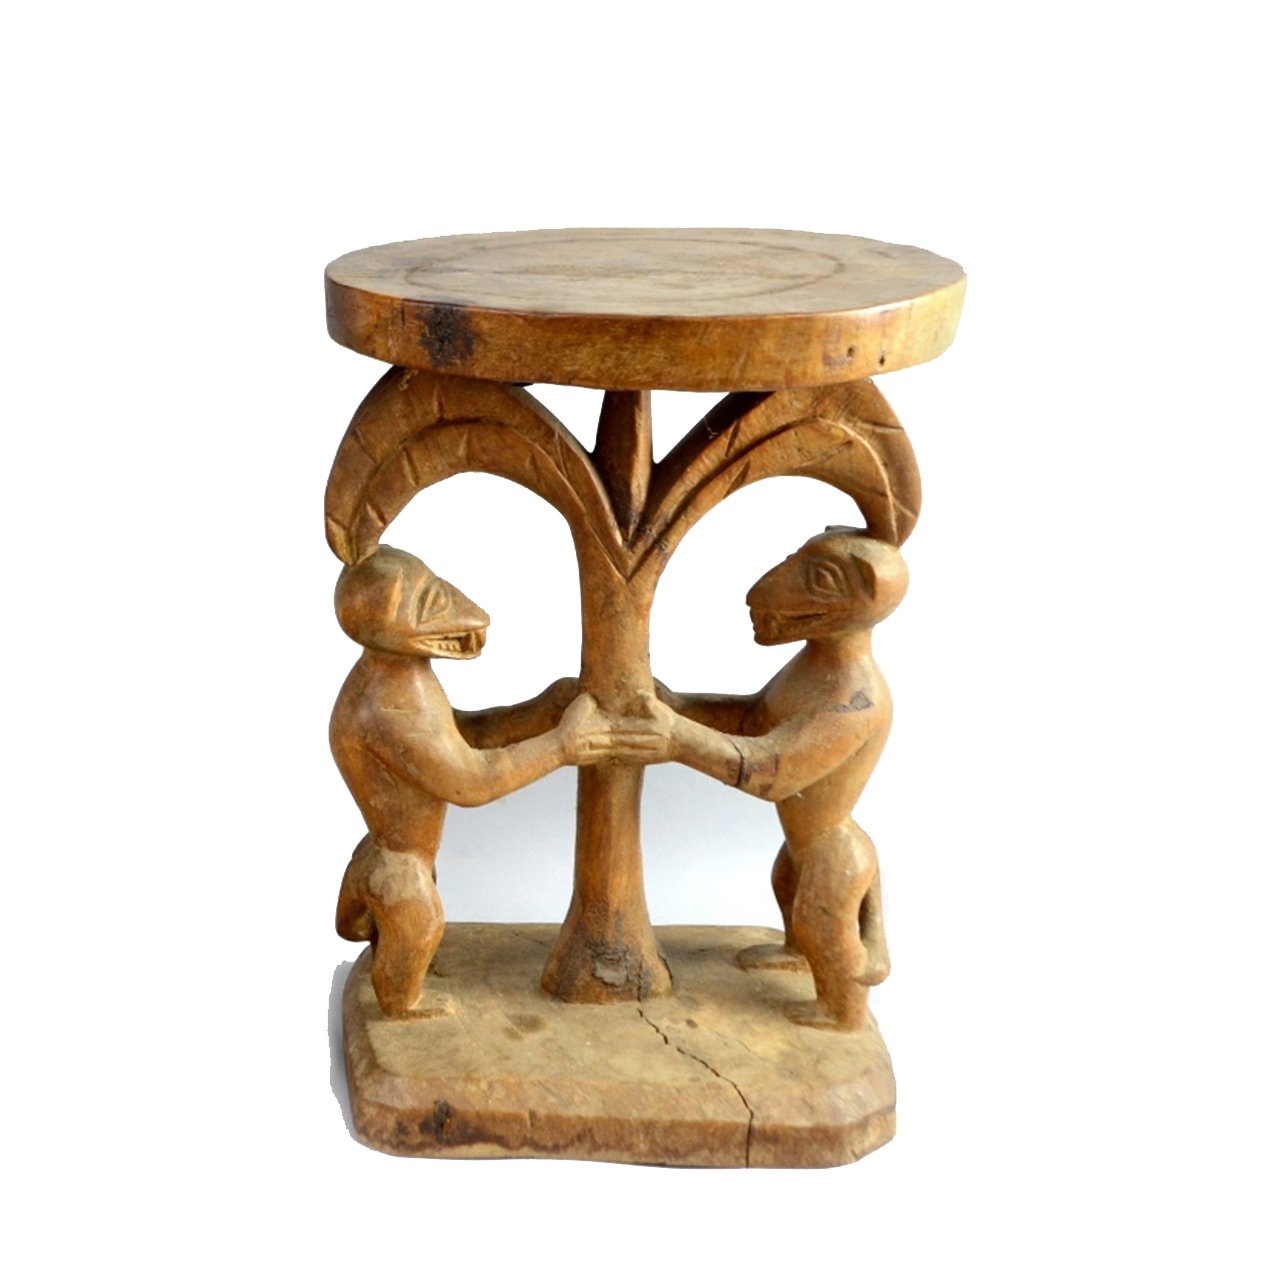 African carved wood stool - Ca. 100 yrs old | Indigo Oriental Antiques